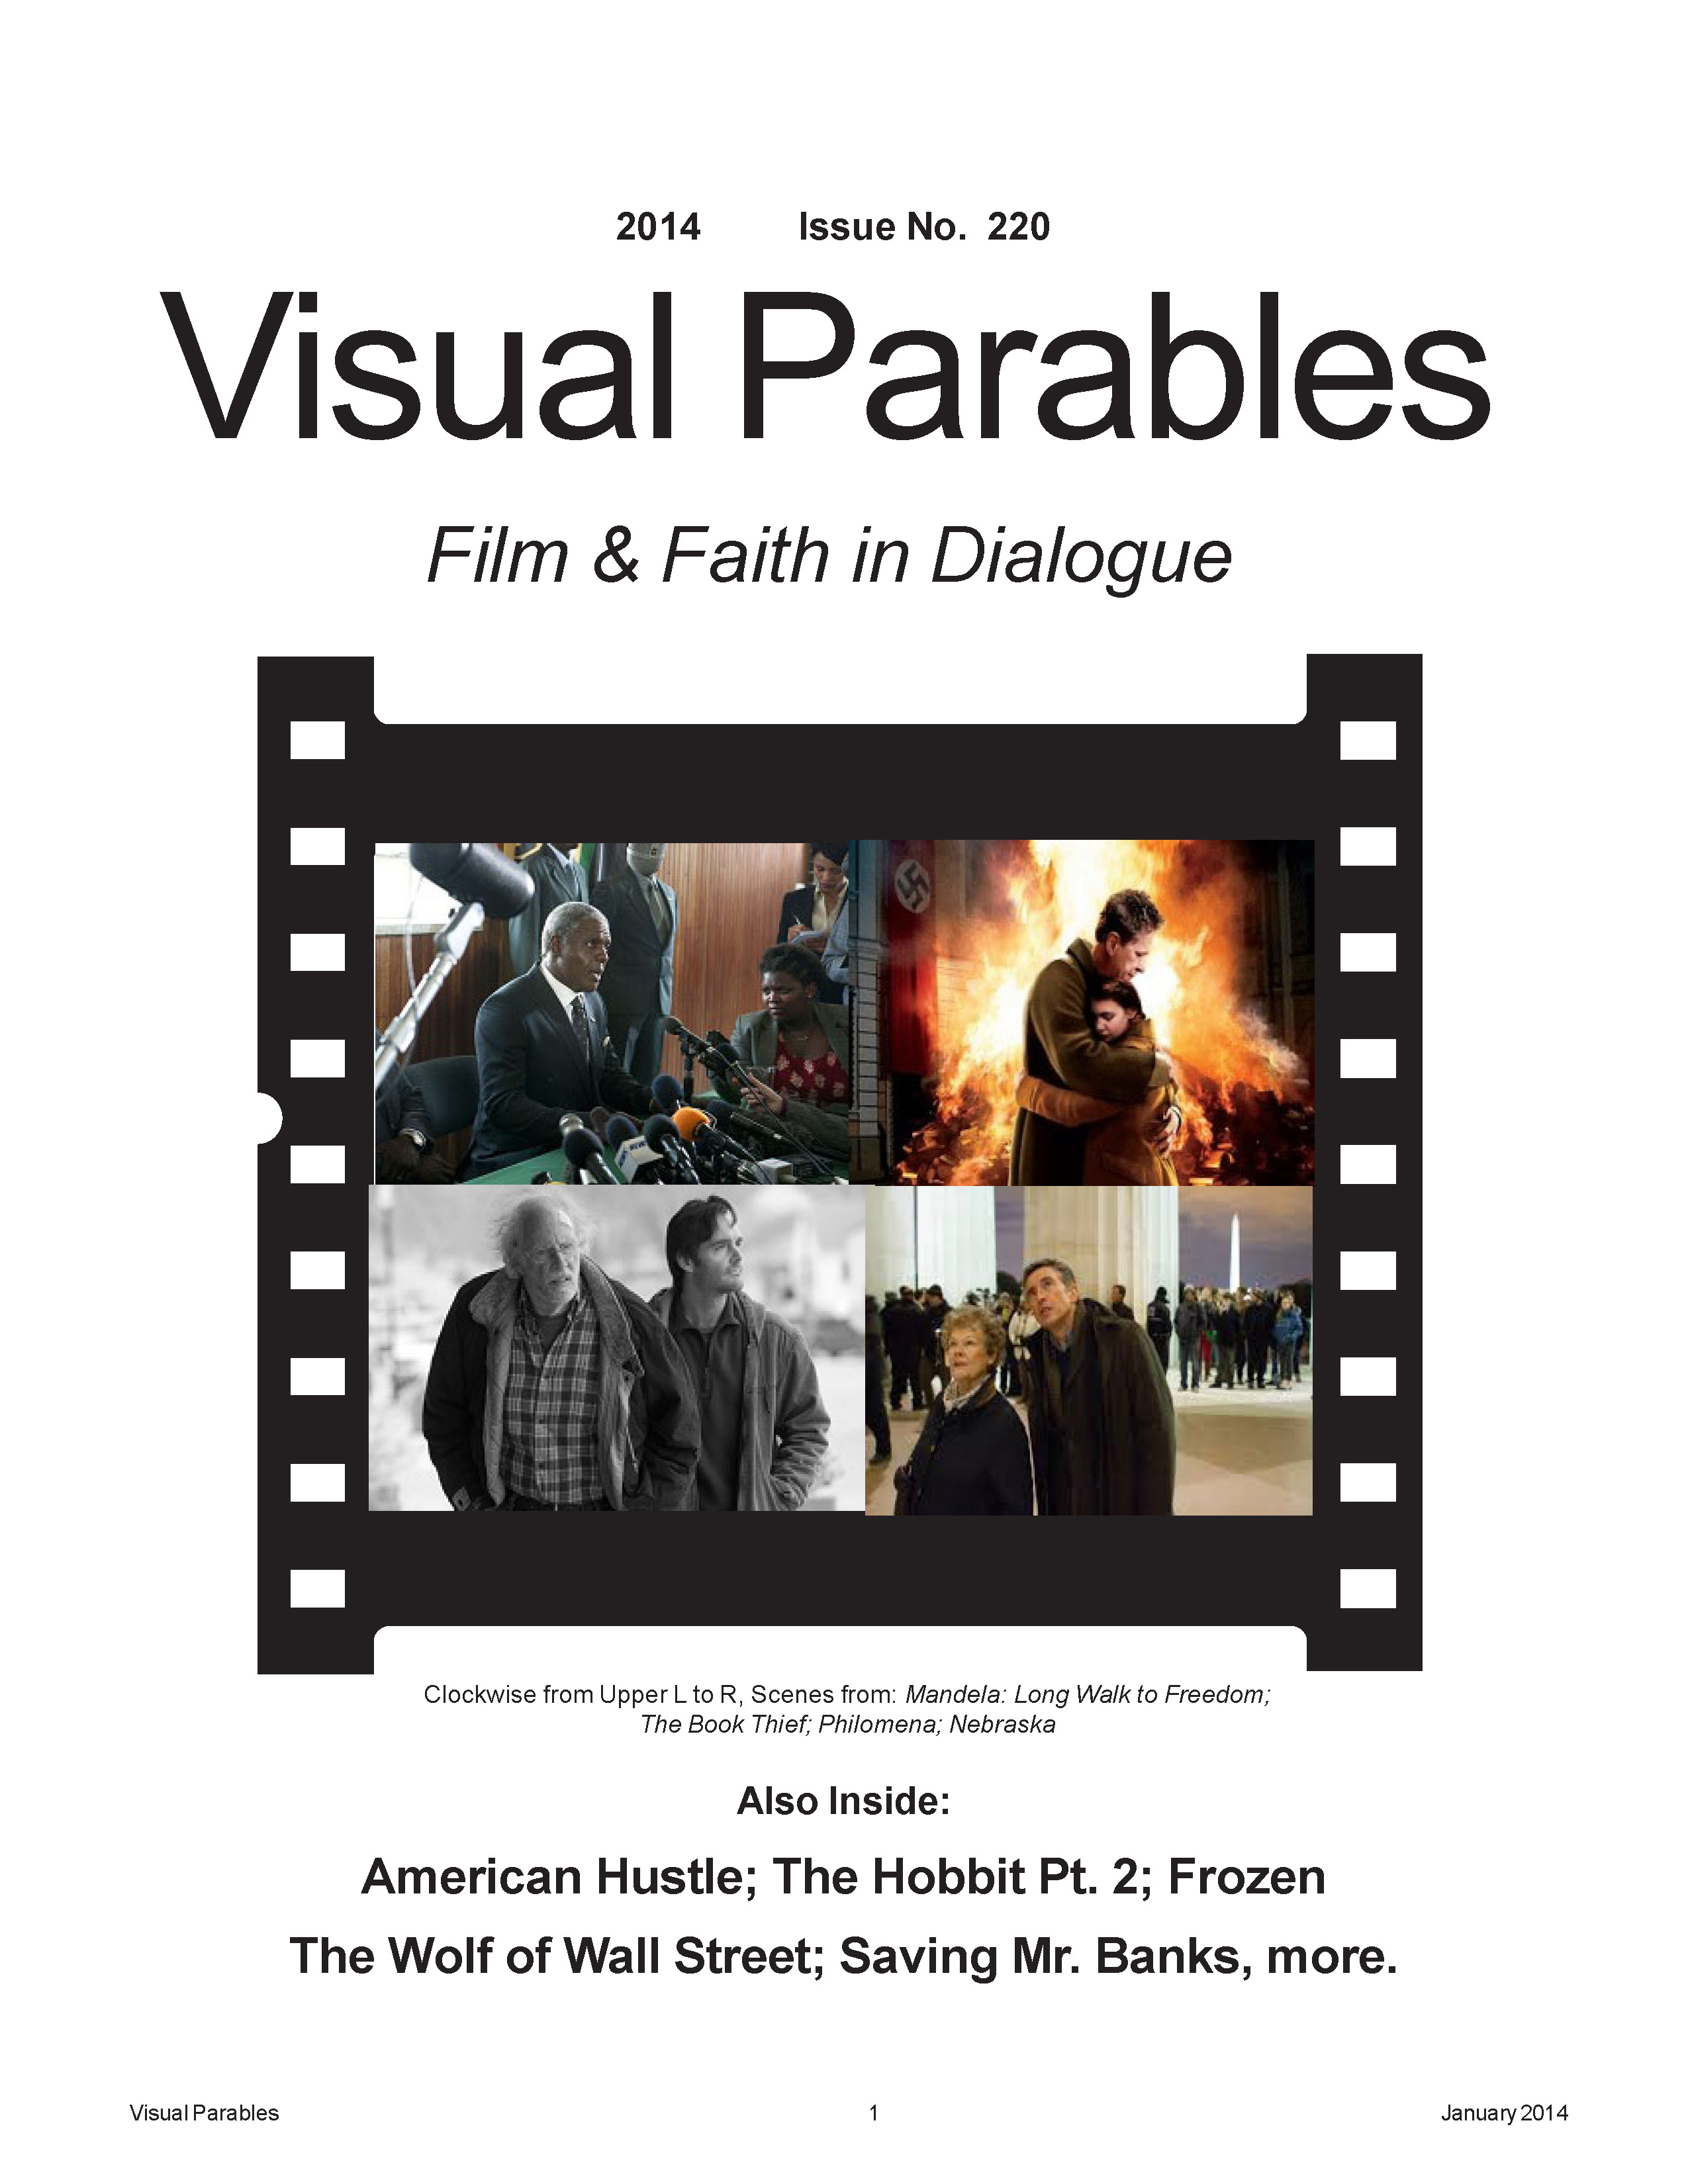 January 2014 issue of Visual Parables